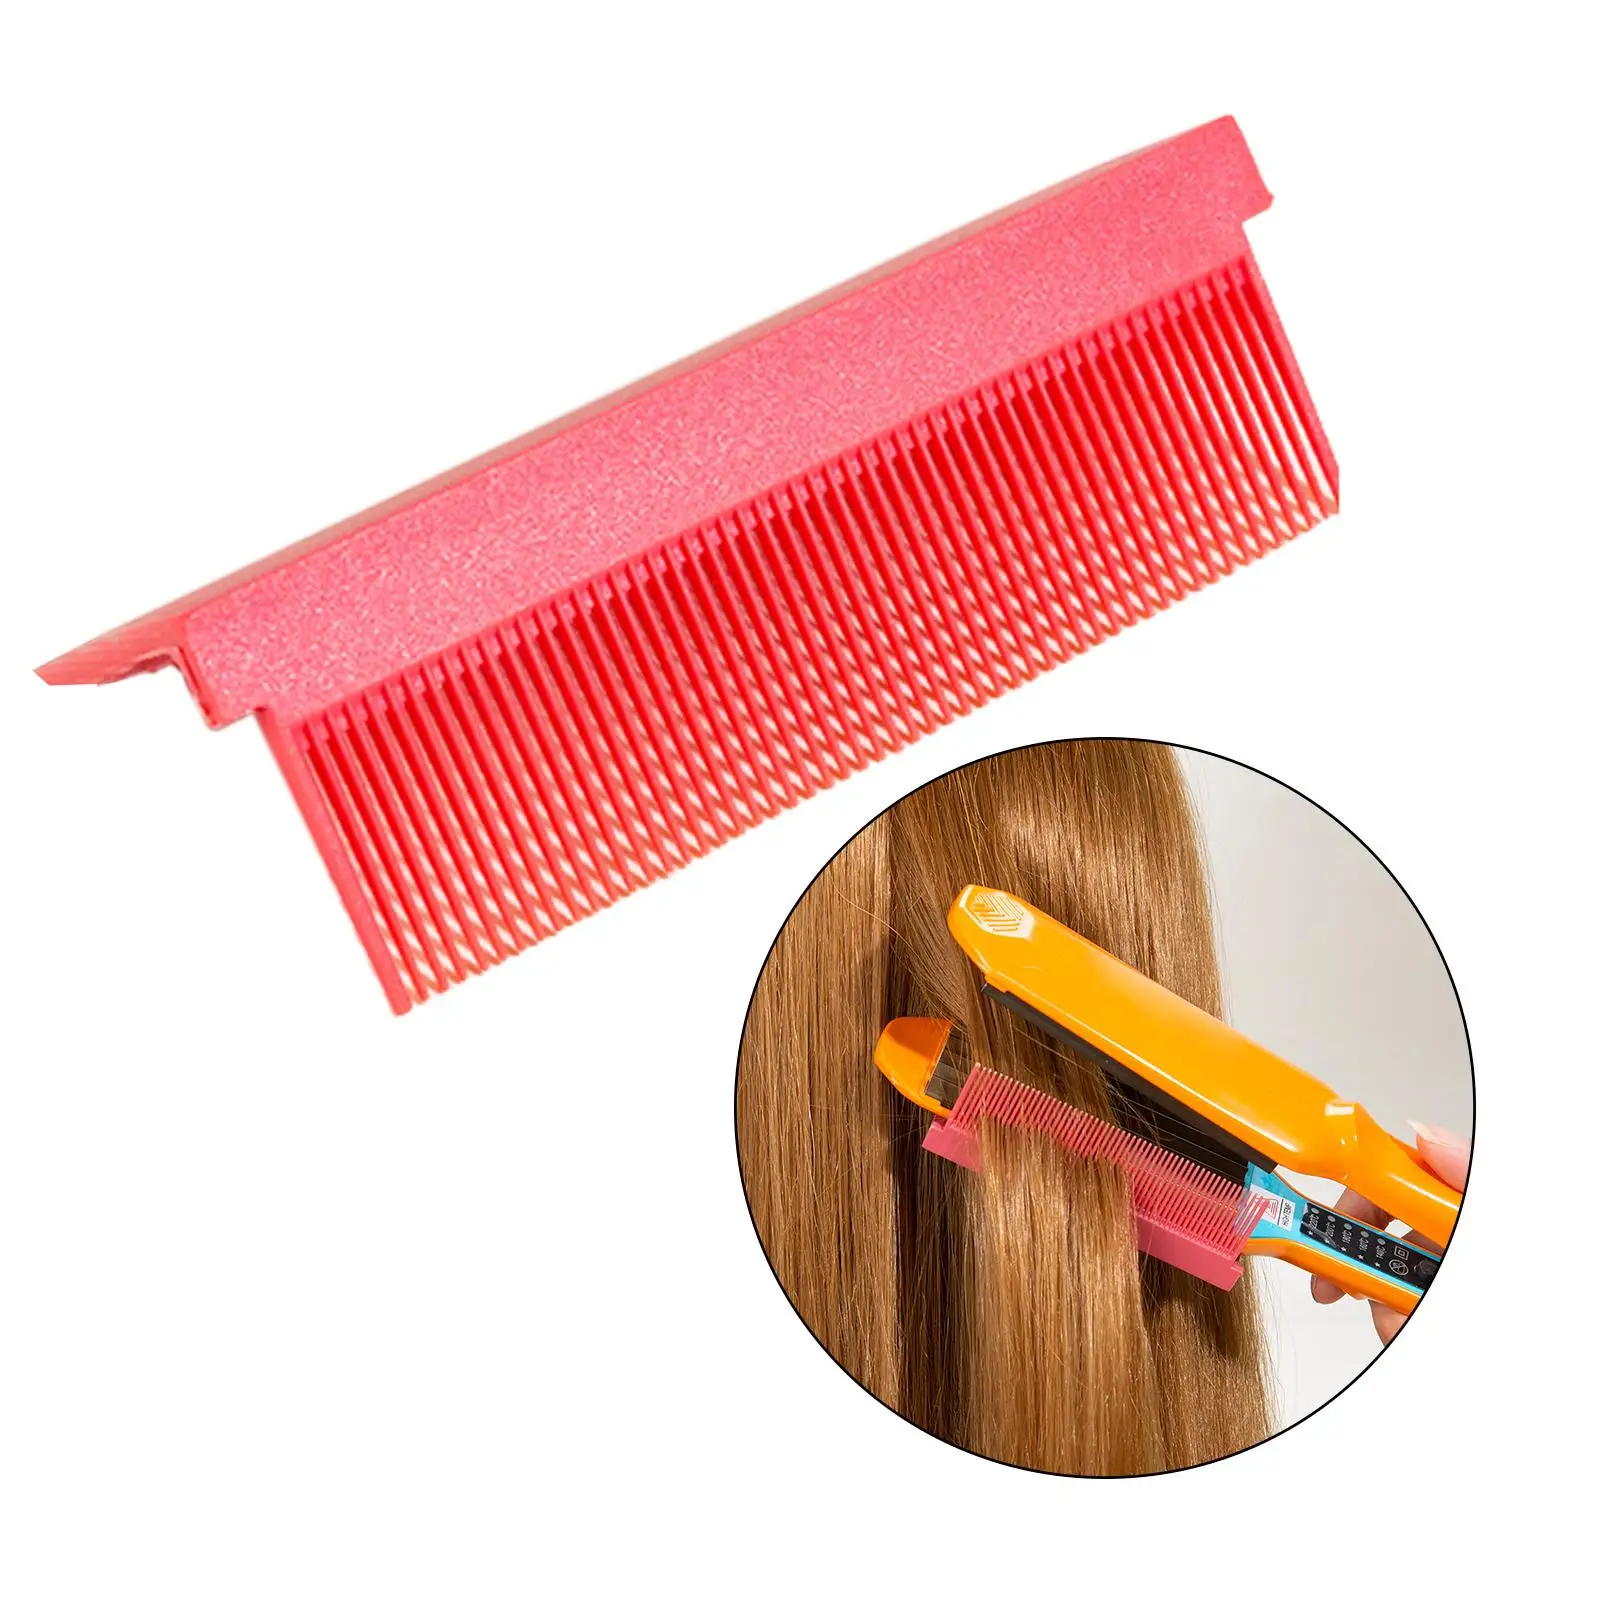 Straightening Comb Attachment Hairdressing Comb for Salon Home DIY Accessories Fine Hair Comb Hair Straightener Comb Attachment